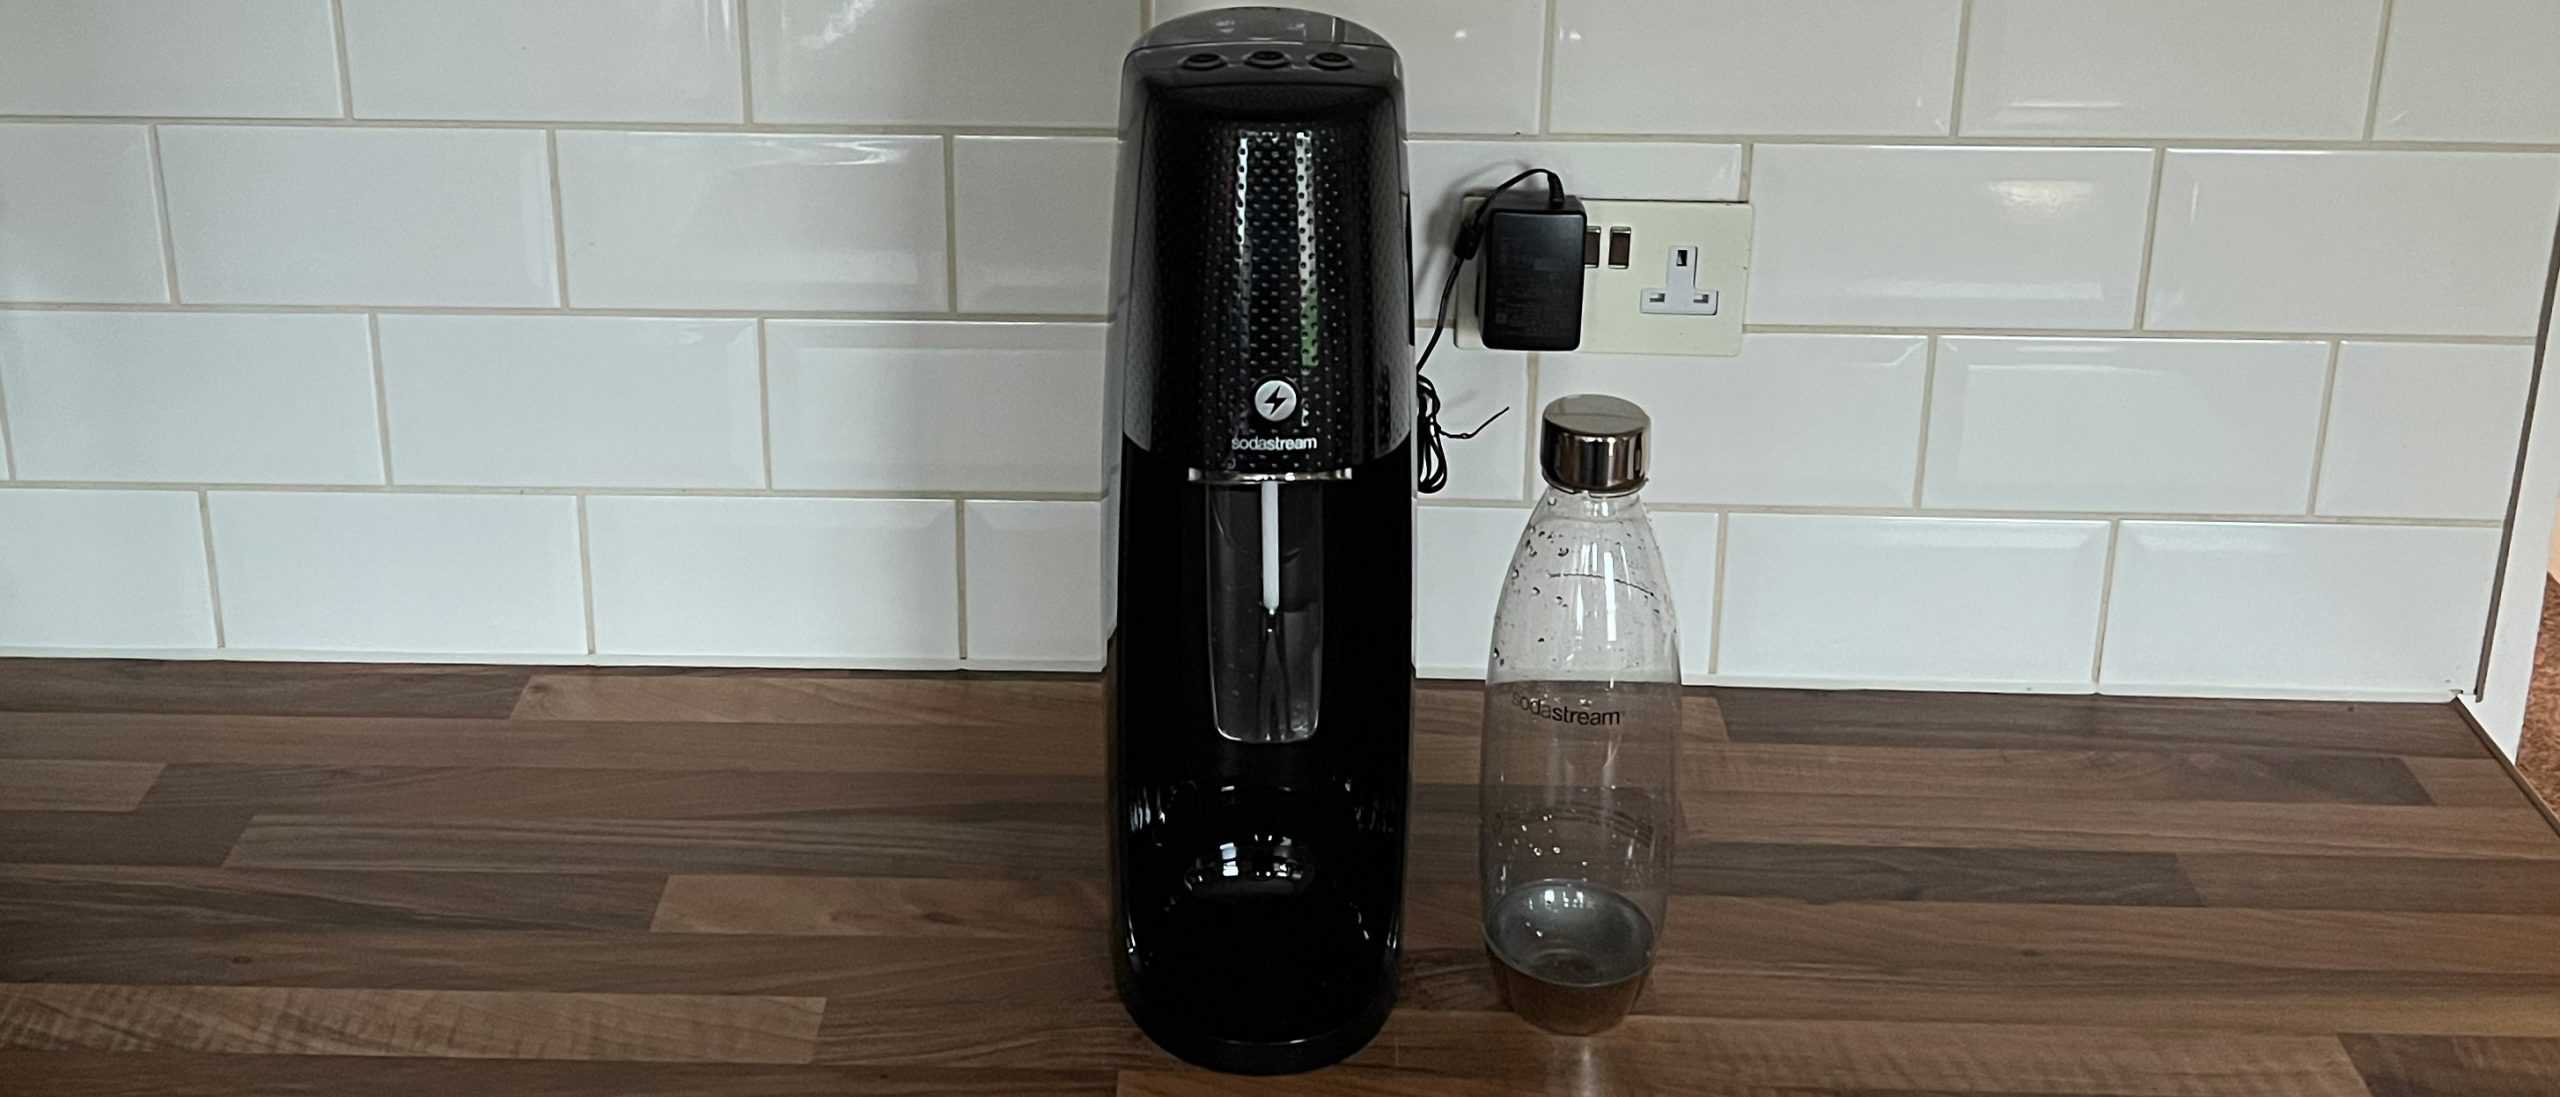 The SodaStream One Touch Automatic Sparkling Water Maker